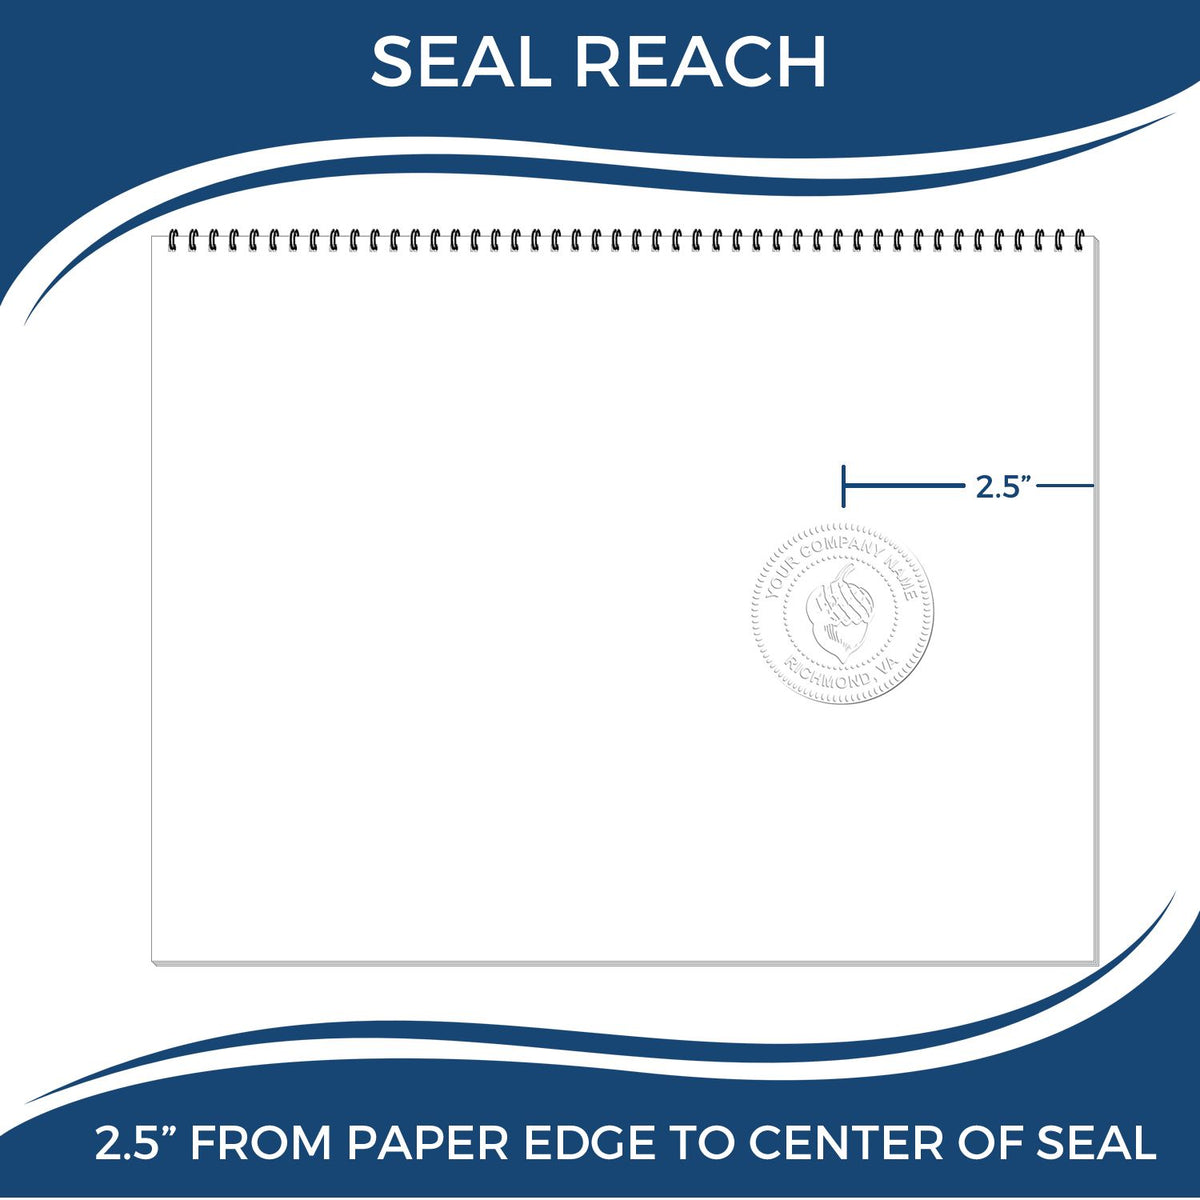 An infographic showing the seal reach which is represented by a ruler and a miniature seal image of the Heavy Duty Cast Iron Minnesota Engineer Seal Embosser